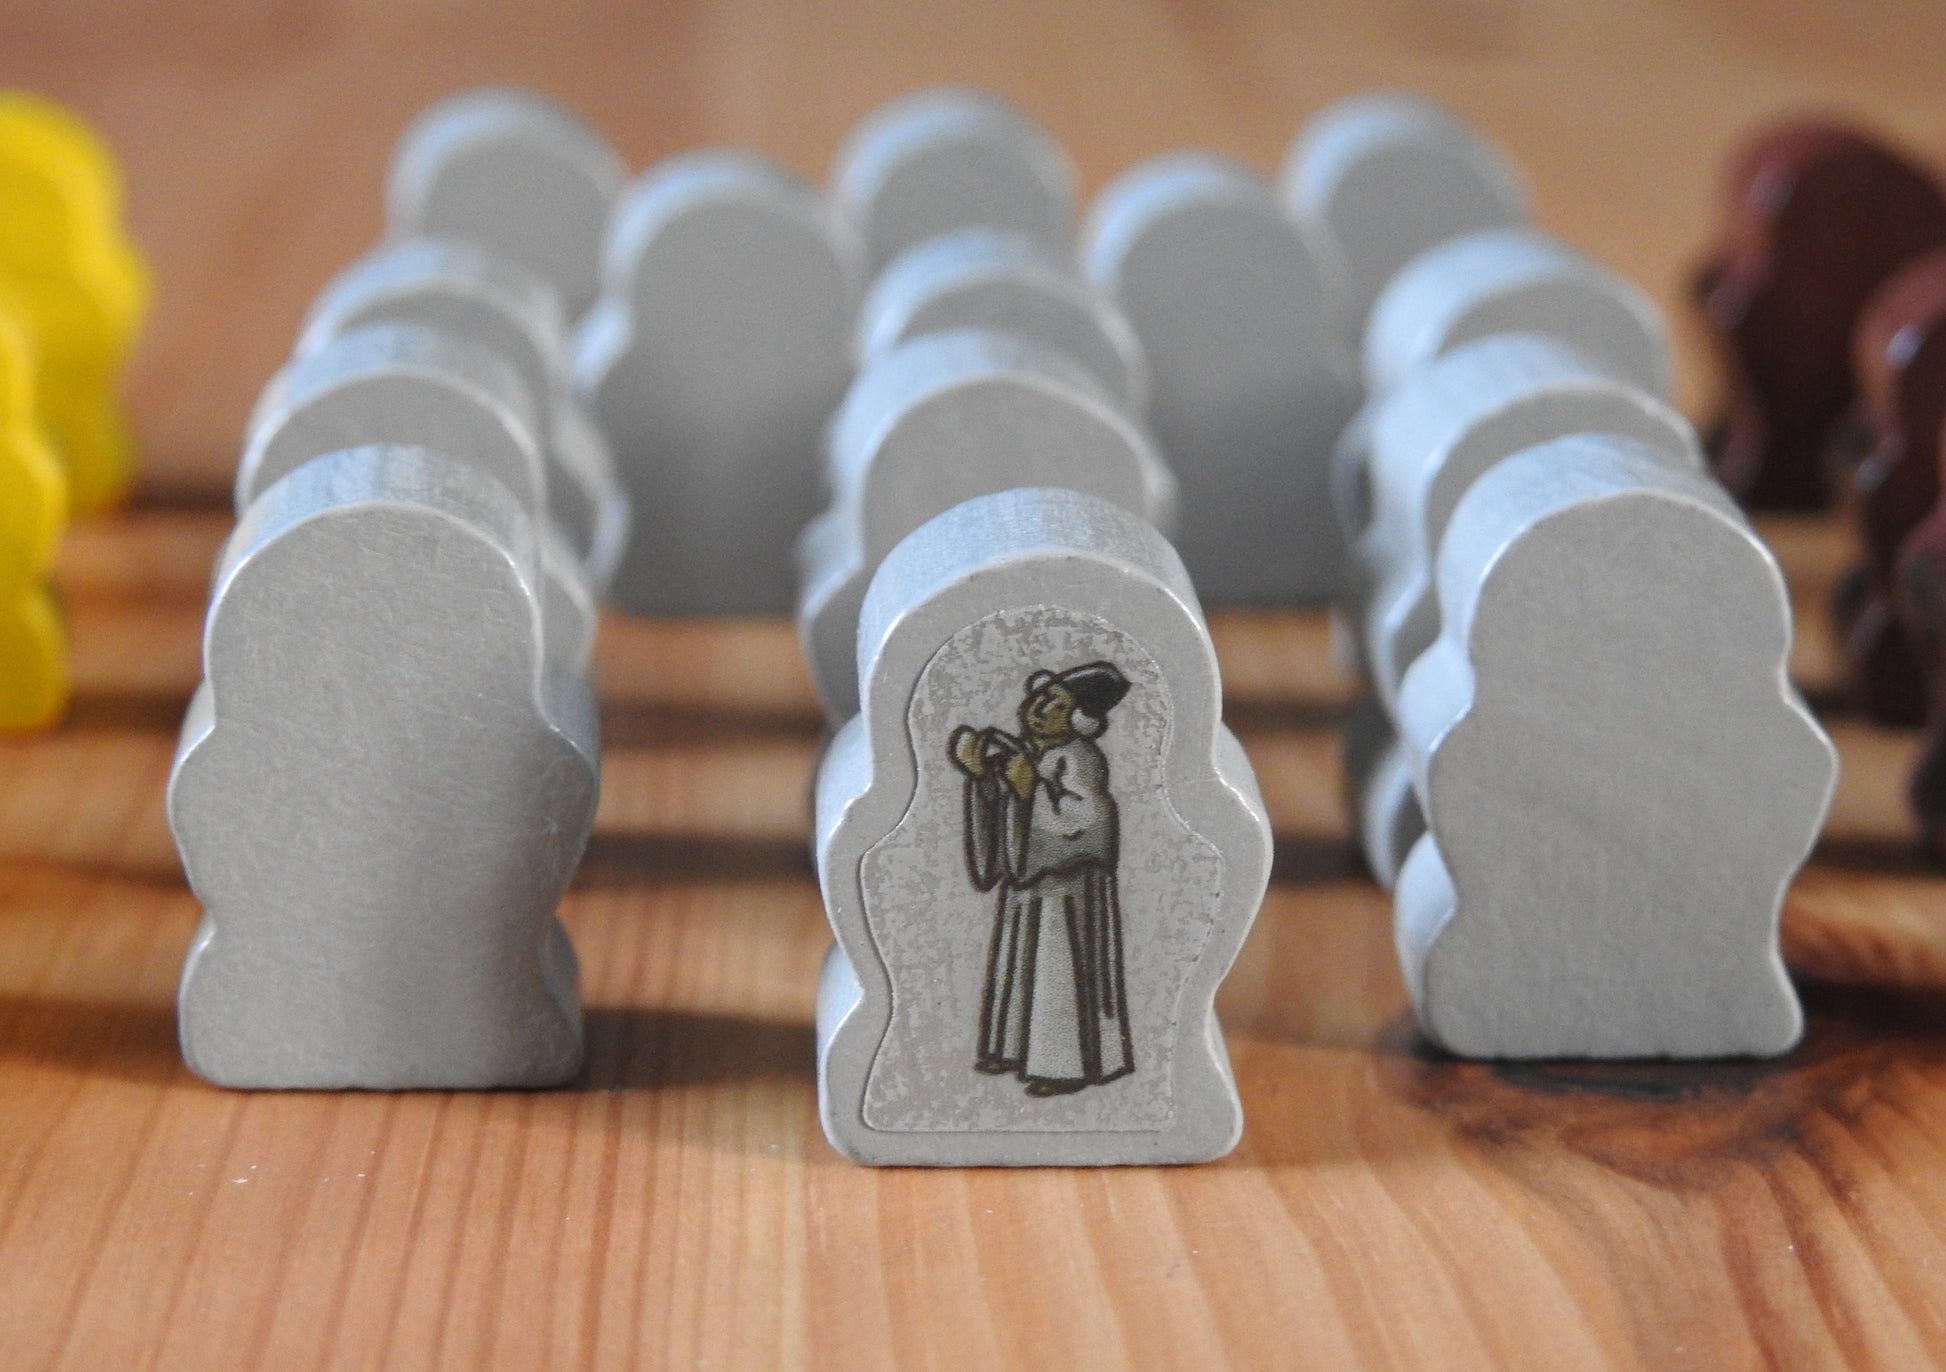 Close up view of the grey wooden scholar figures.